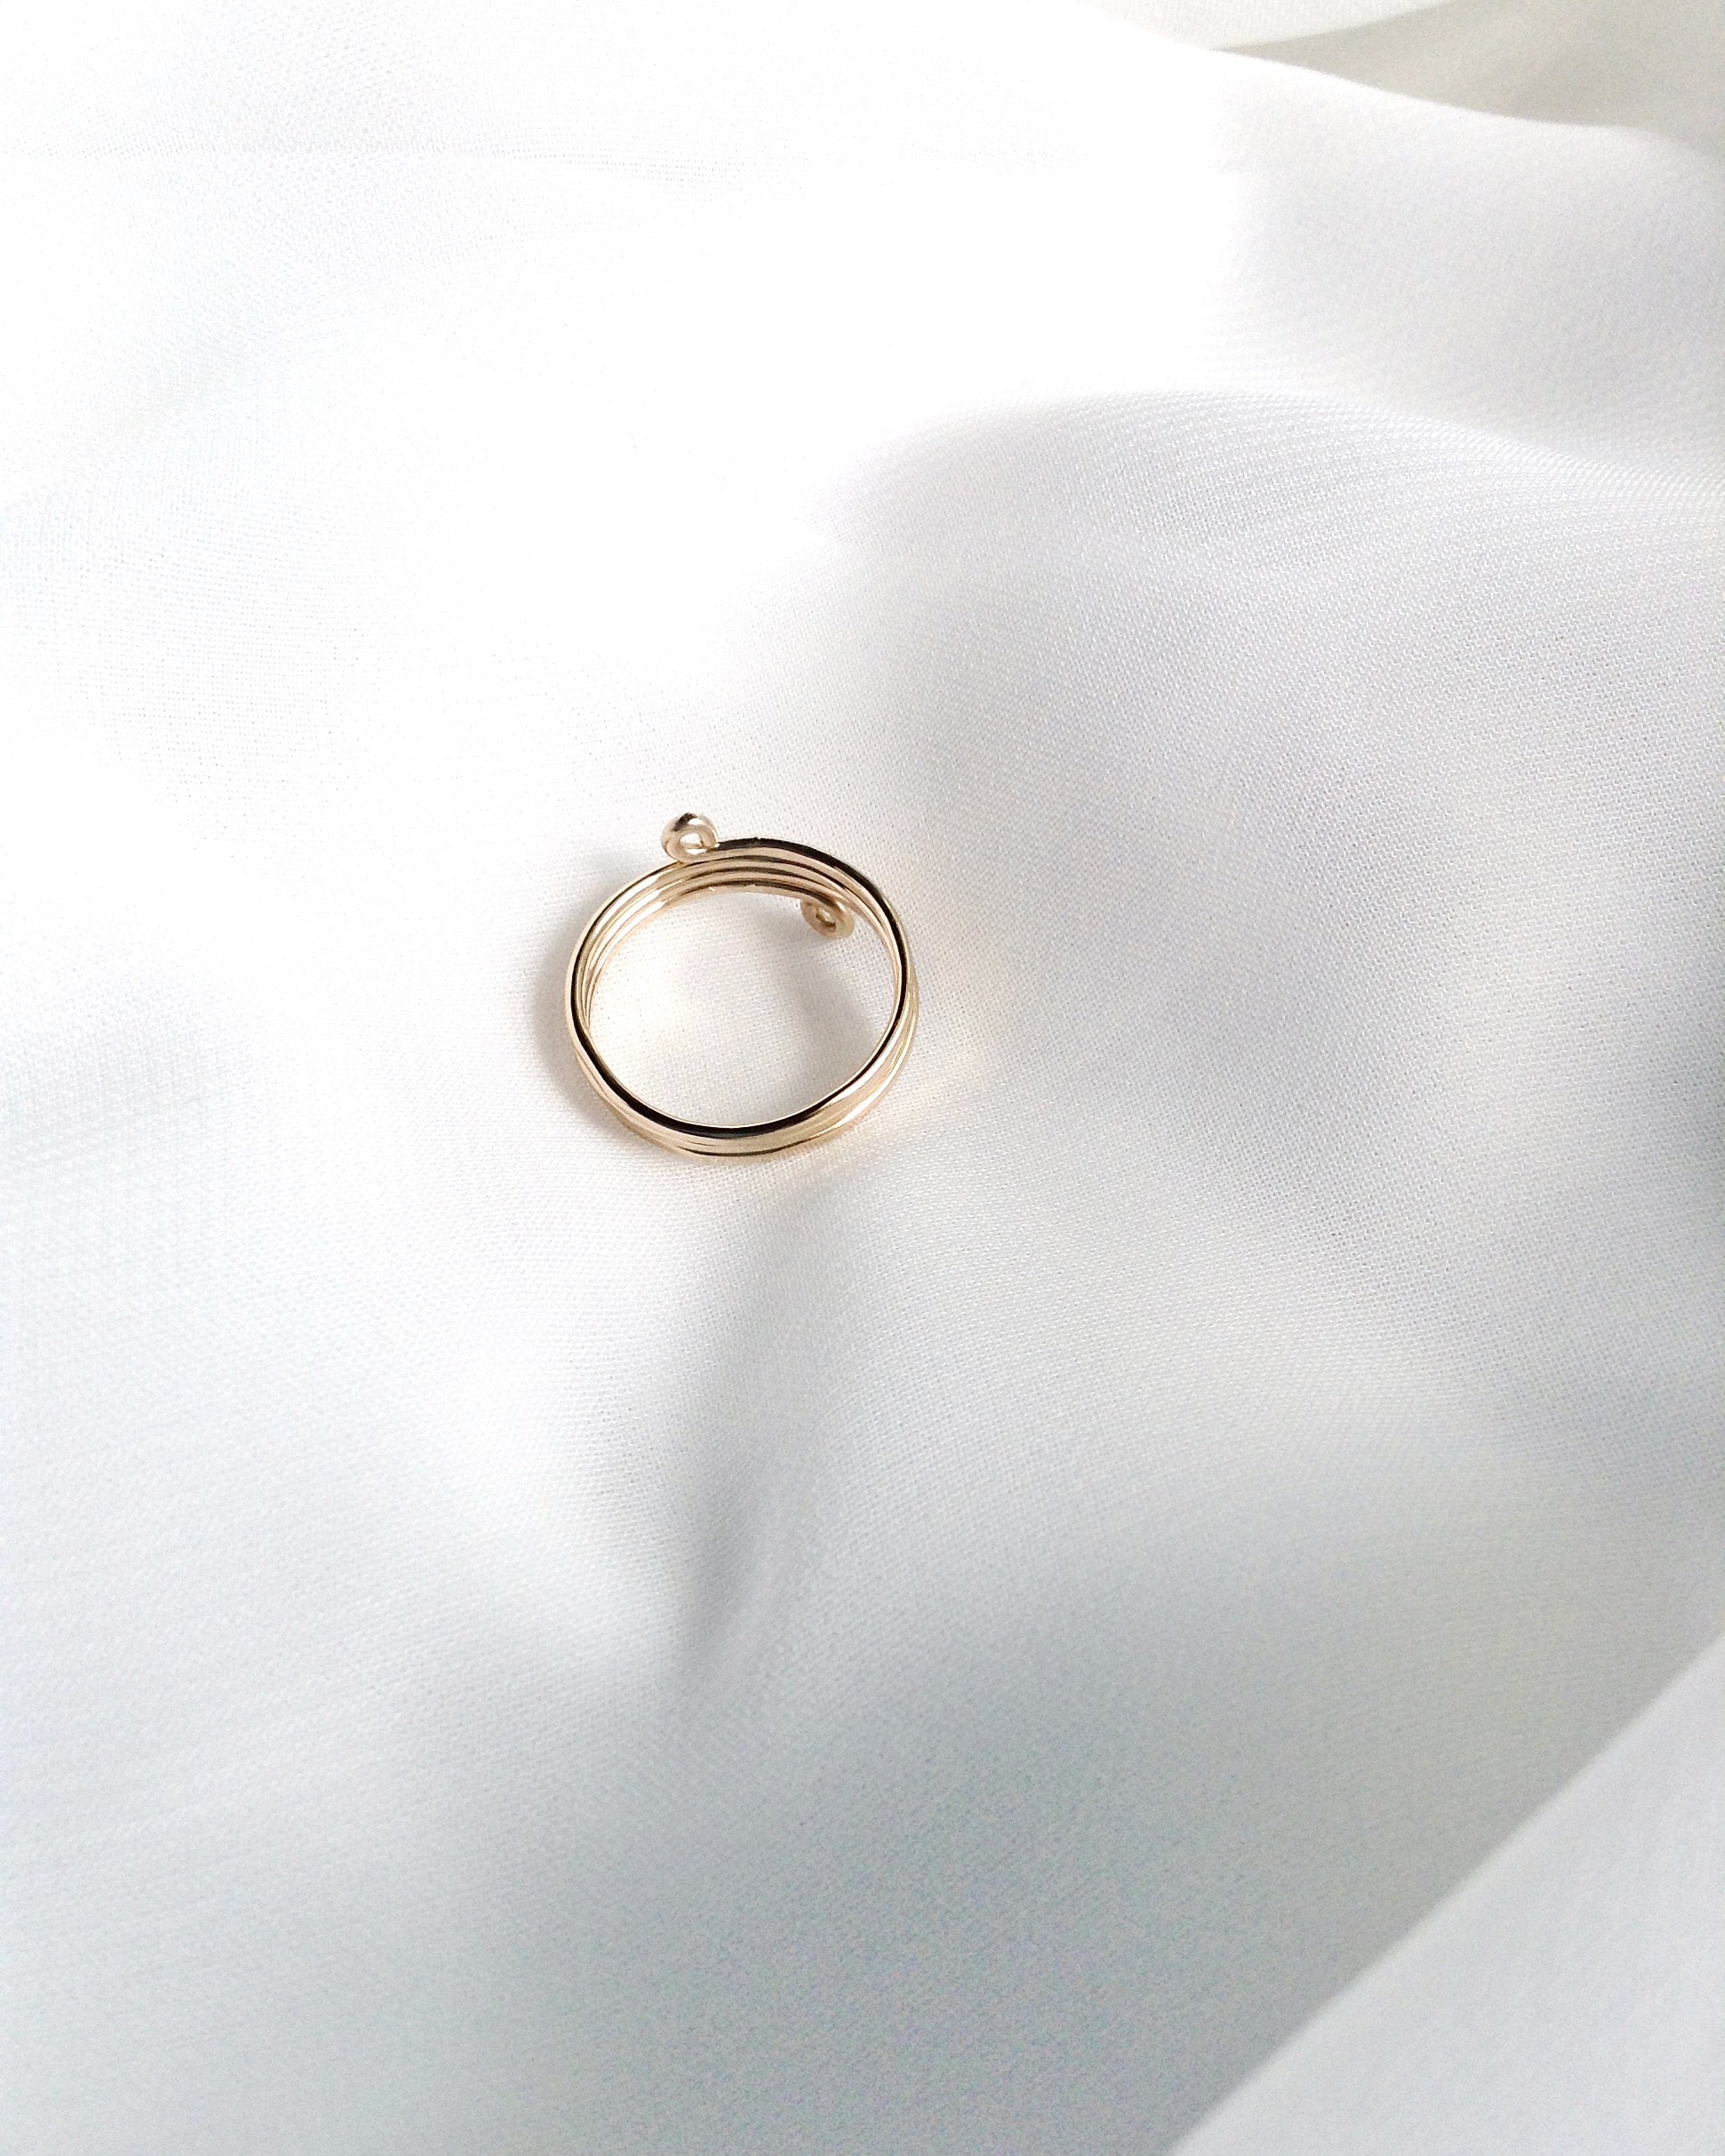 Simple Coil Ring in Gold Filled or Sterling Silver | IB Jewelry